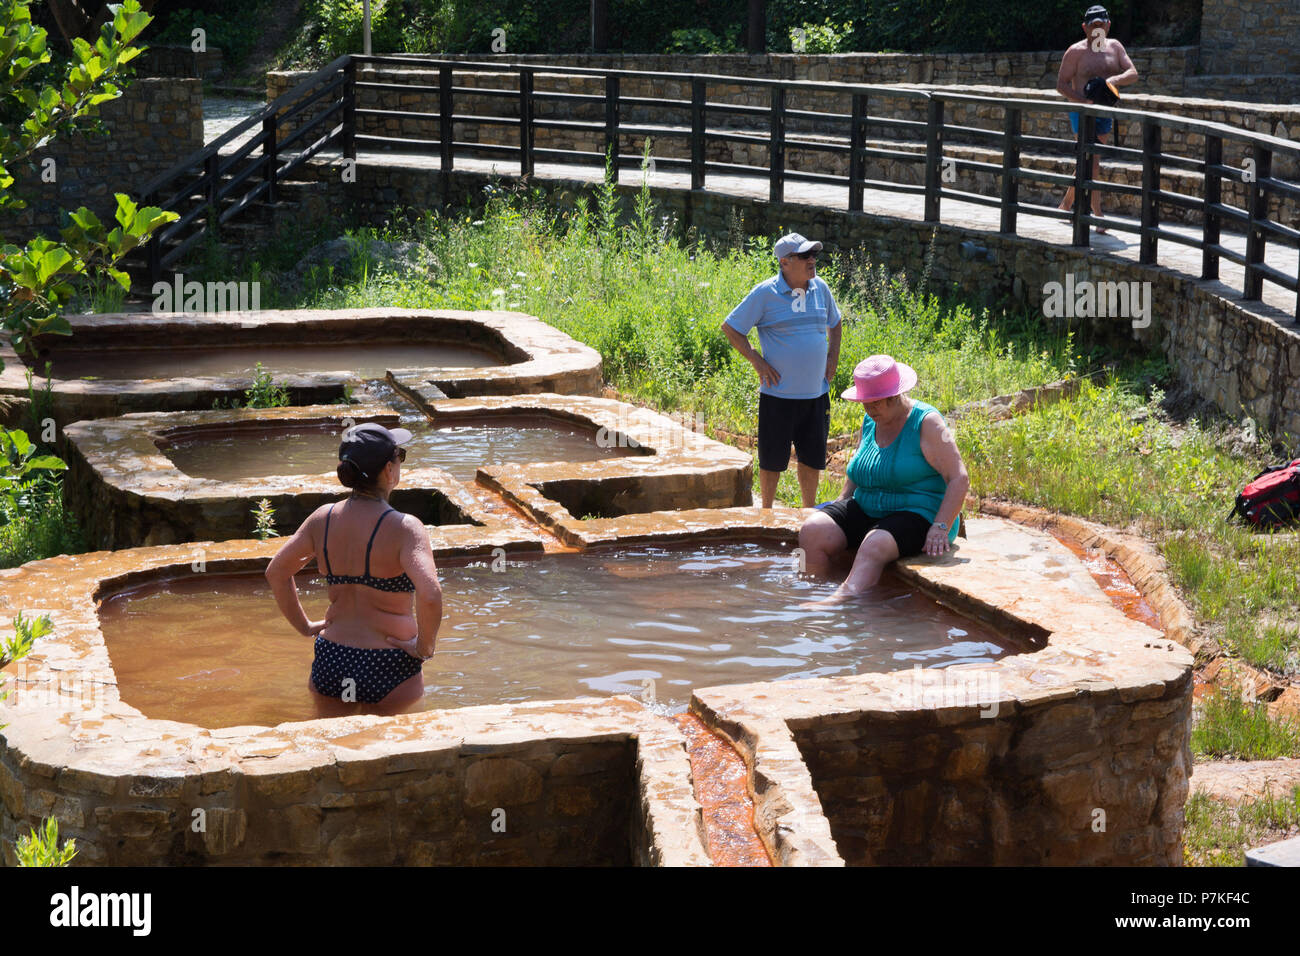 Larissa, Greece. 6th July, 2018. Tourists take a bath in curative red water at Kokkino Nero Village of Larissa in northeast Thessaly, Greece, July 6, 2018. Curative red water attracts visitors from all over the world looking for bath therapy along with mineral water drinking therapy. Credit: Apostolos Domalis/Xinhua/Alamy Live News Stock Photo